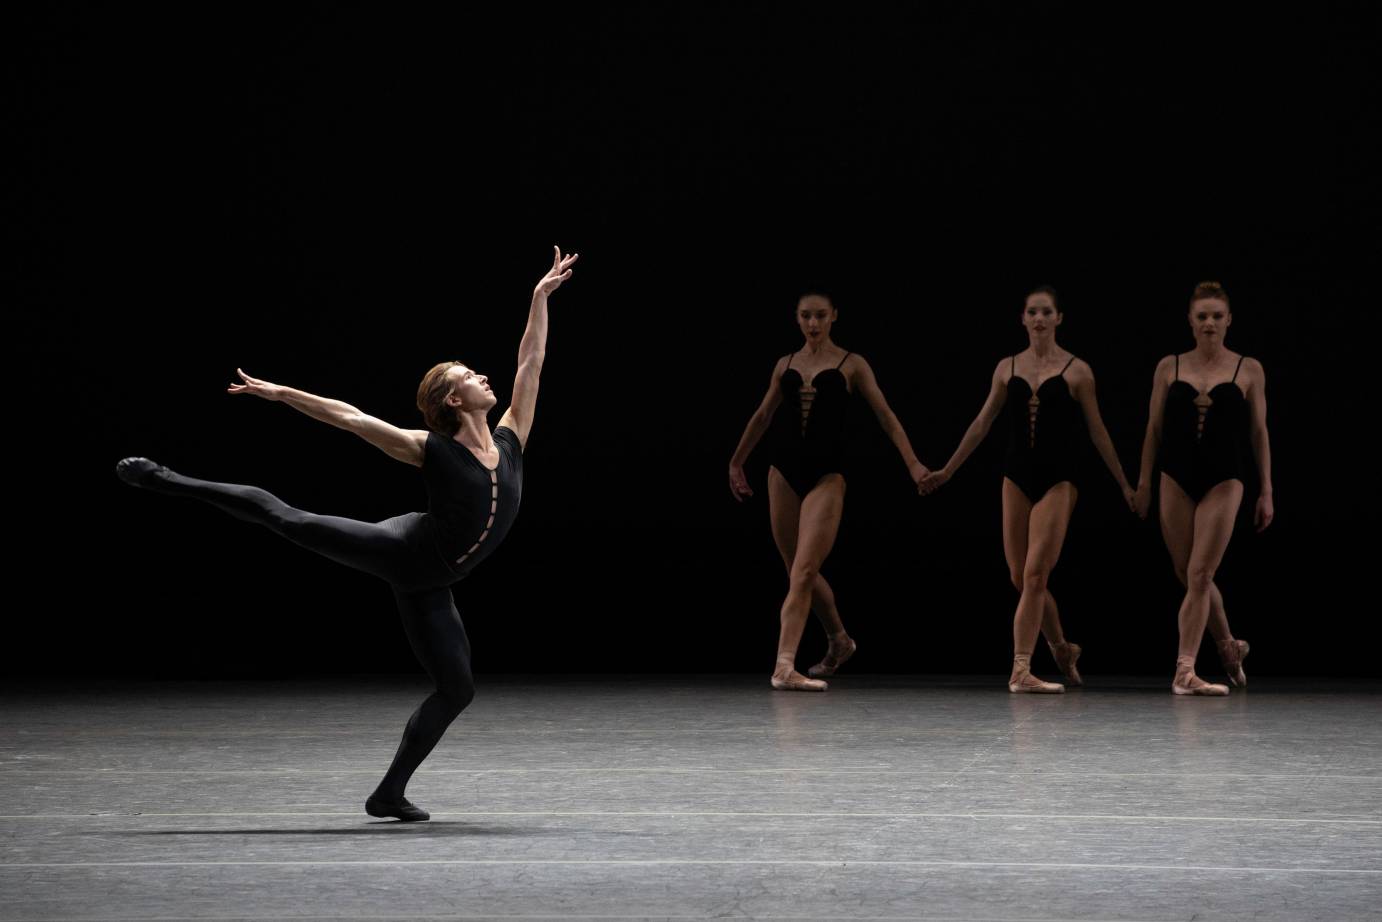 A man in amplified arabesque is in front of three women